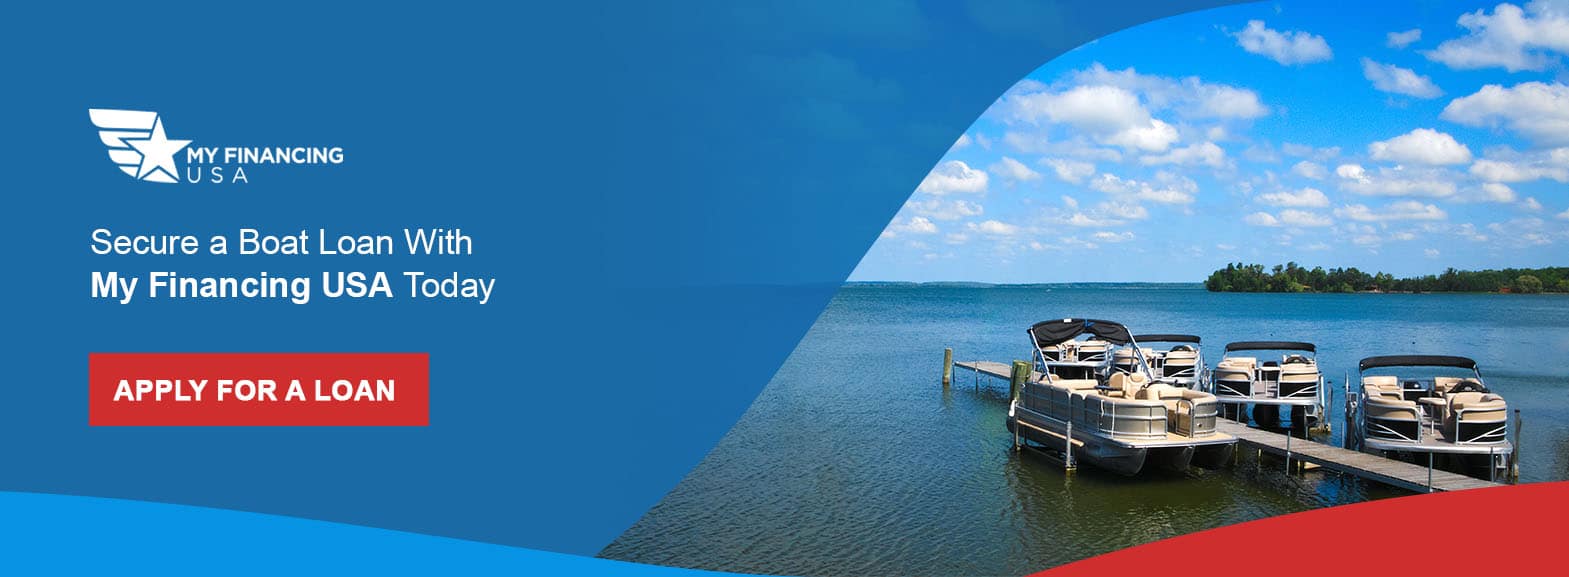 Secure a Boat Loan With My Financing USA Today. Apply for a loan!